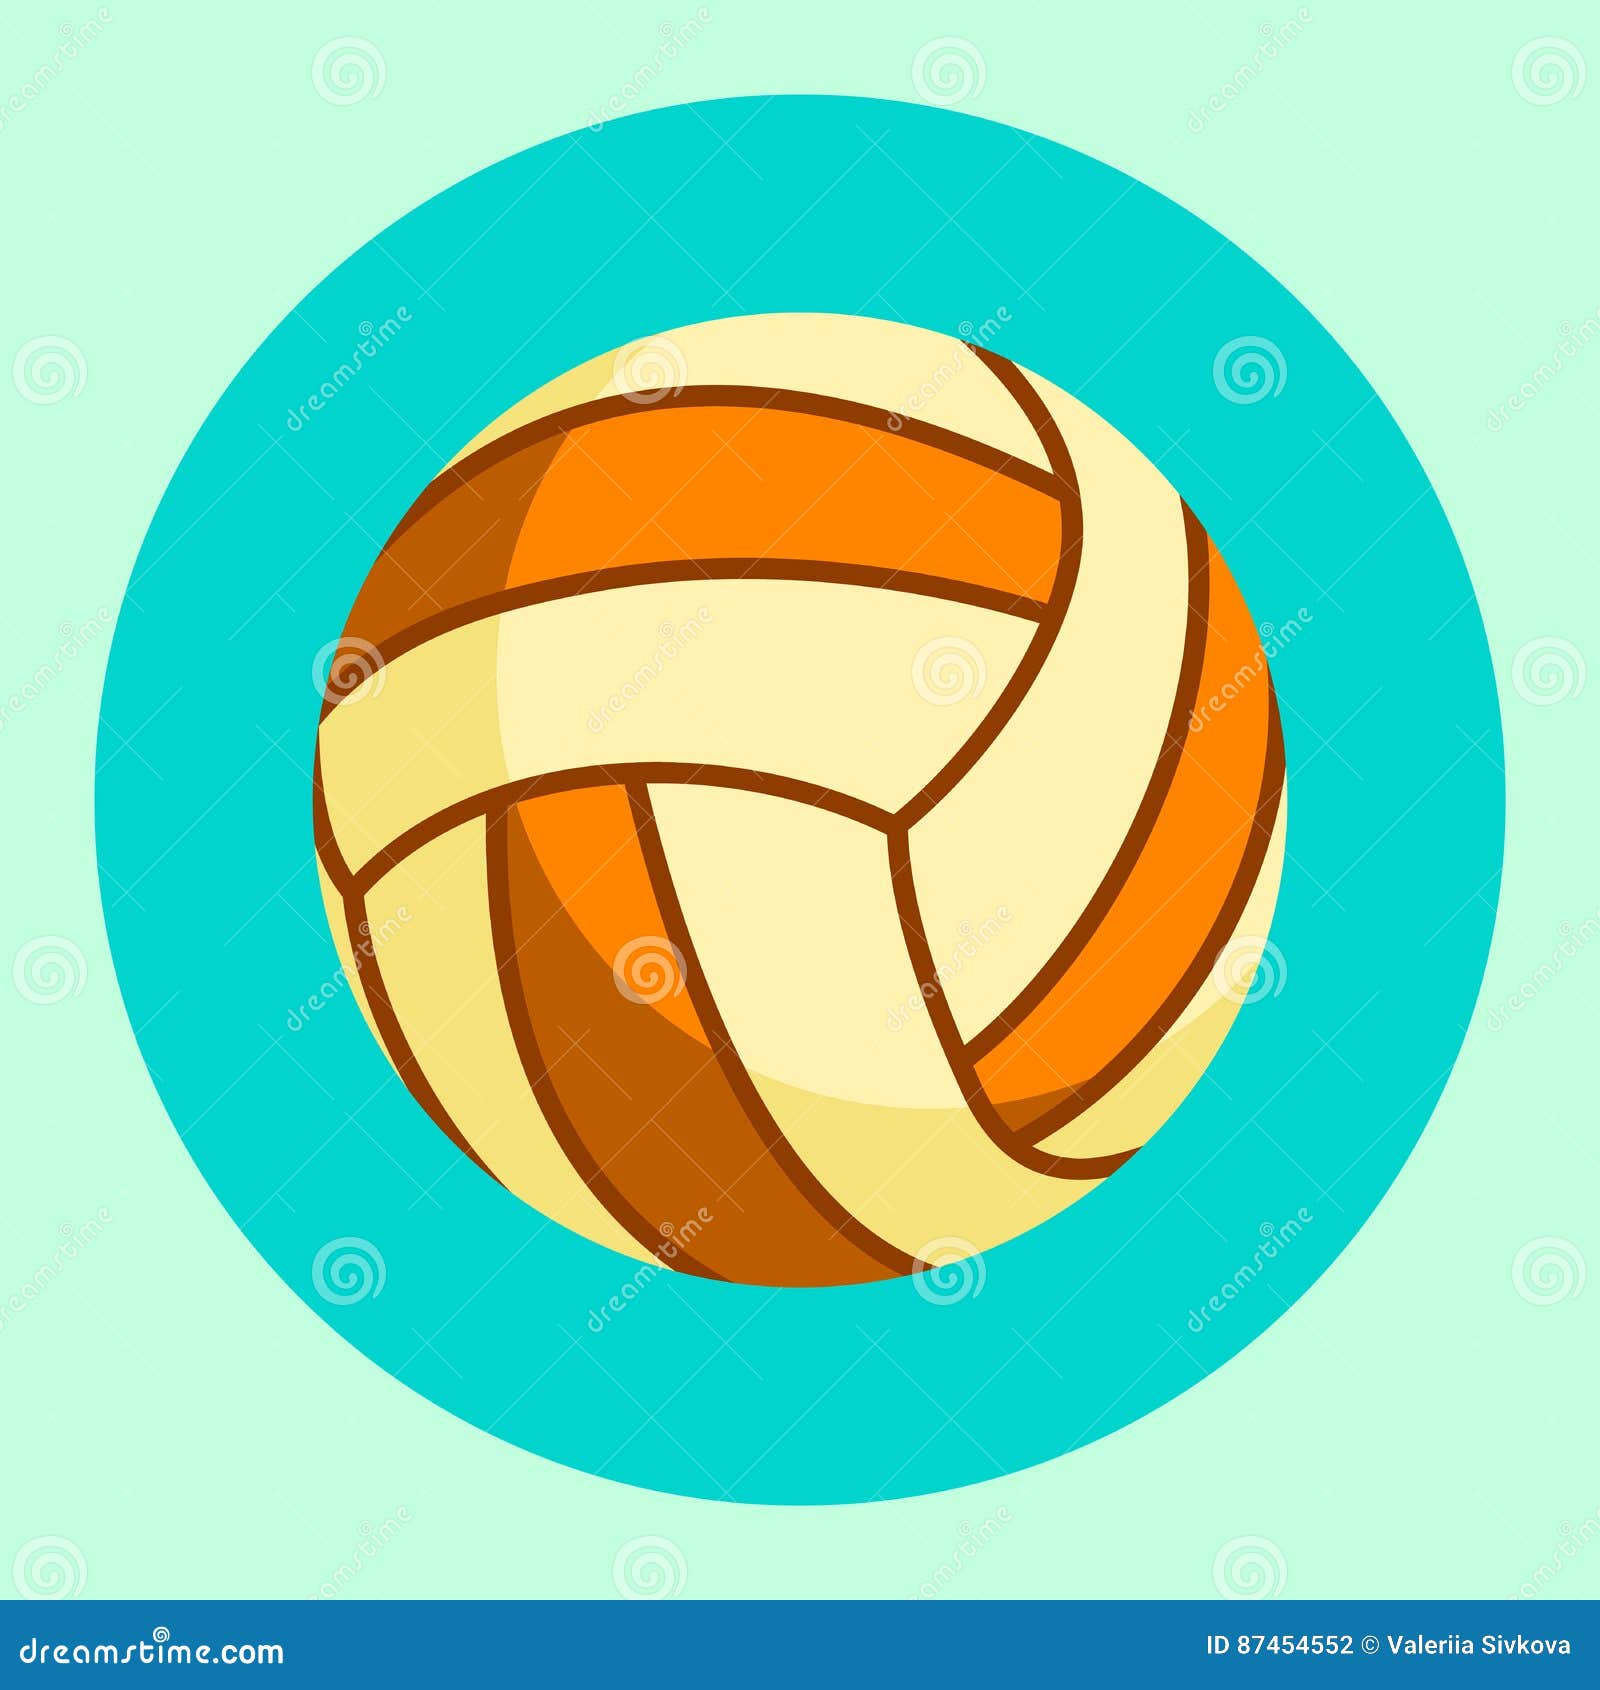 Volleyball Ball Icon. Colorful Volleyball Ball on a Turquoise ...